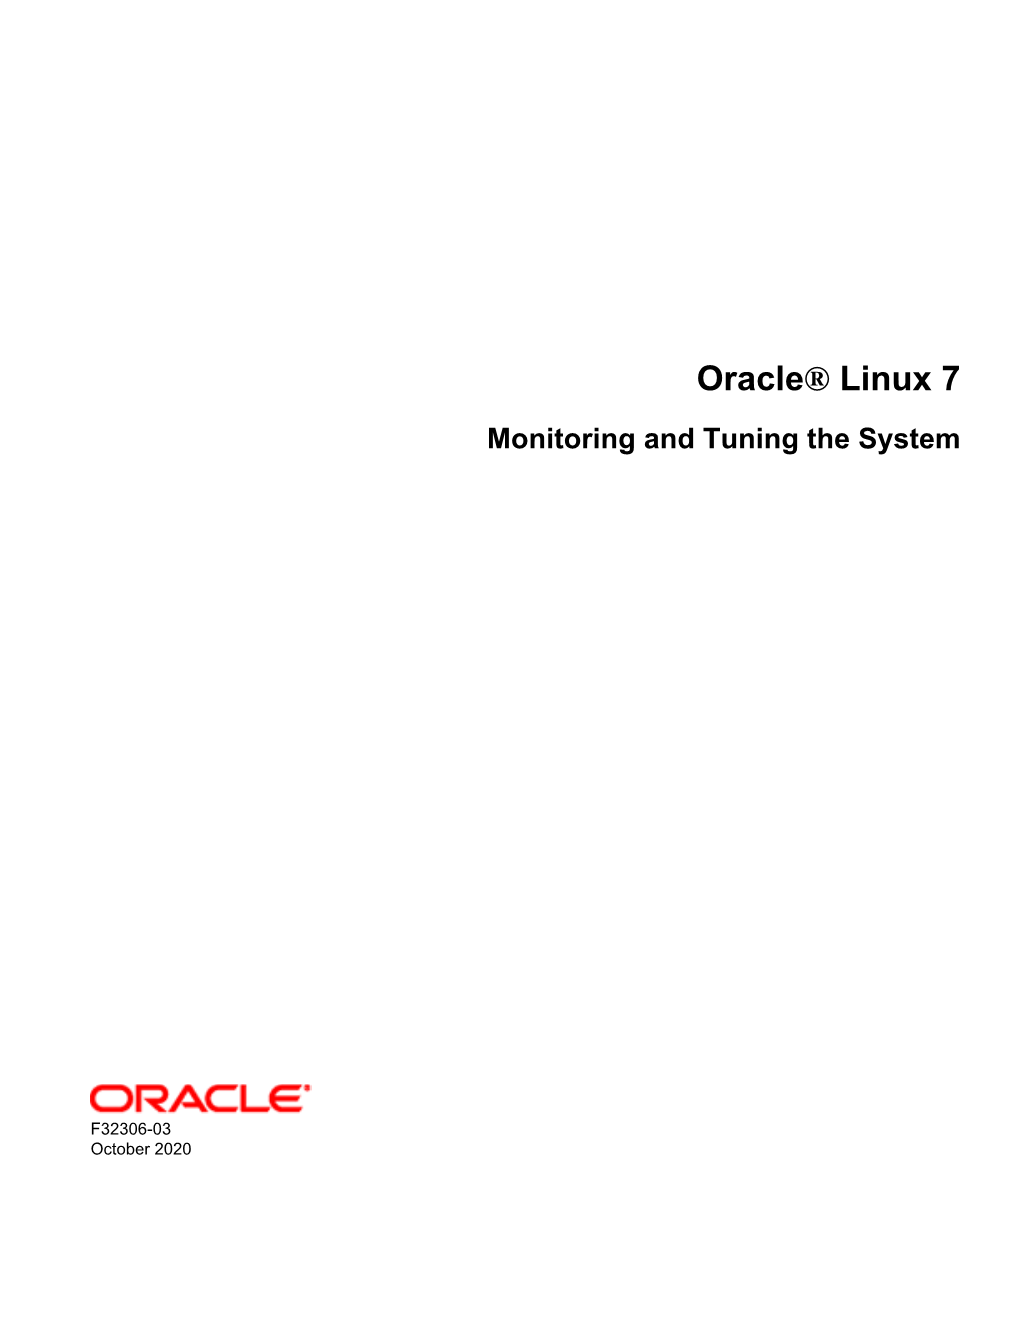 Oracle® Linux 7 Monitoring and Tuning the System